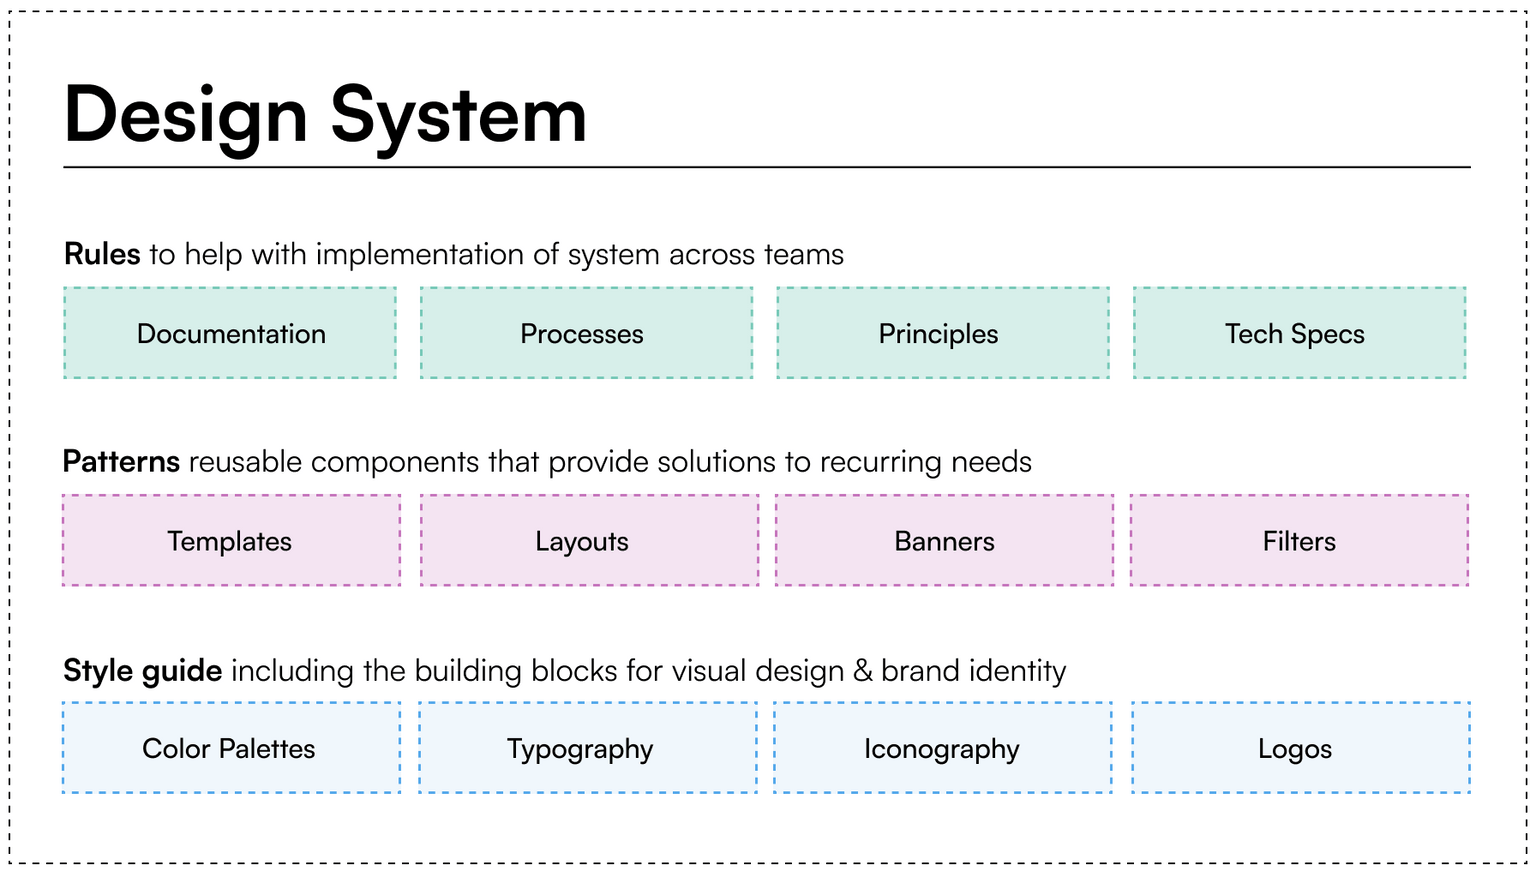 design system diagram showing the key elements: under style guide there are color palettes, typography, iconography, logos. Under Patterns, there are templates, layouts, banners, filters and under Rules there is documentation, processes, principles and tech specs. 